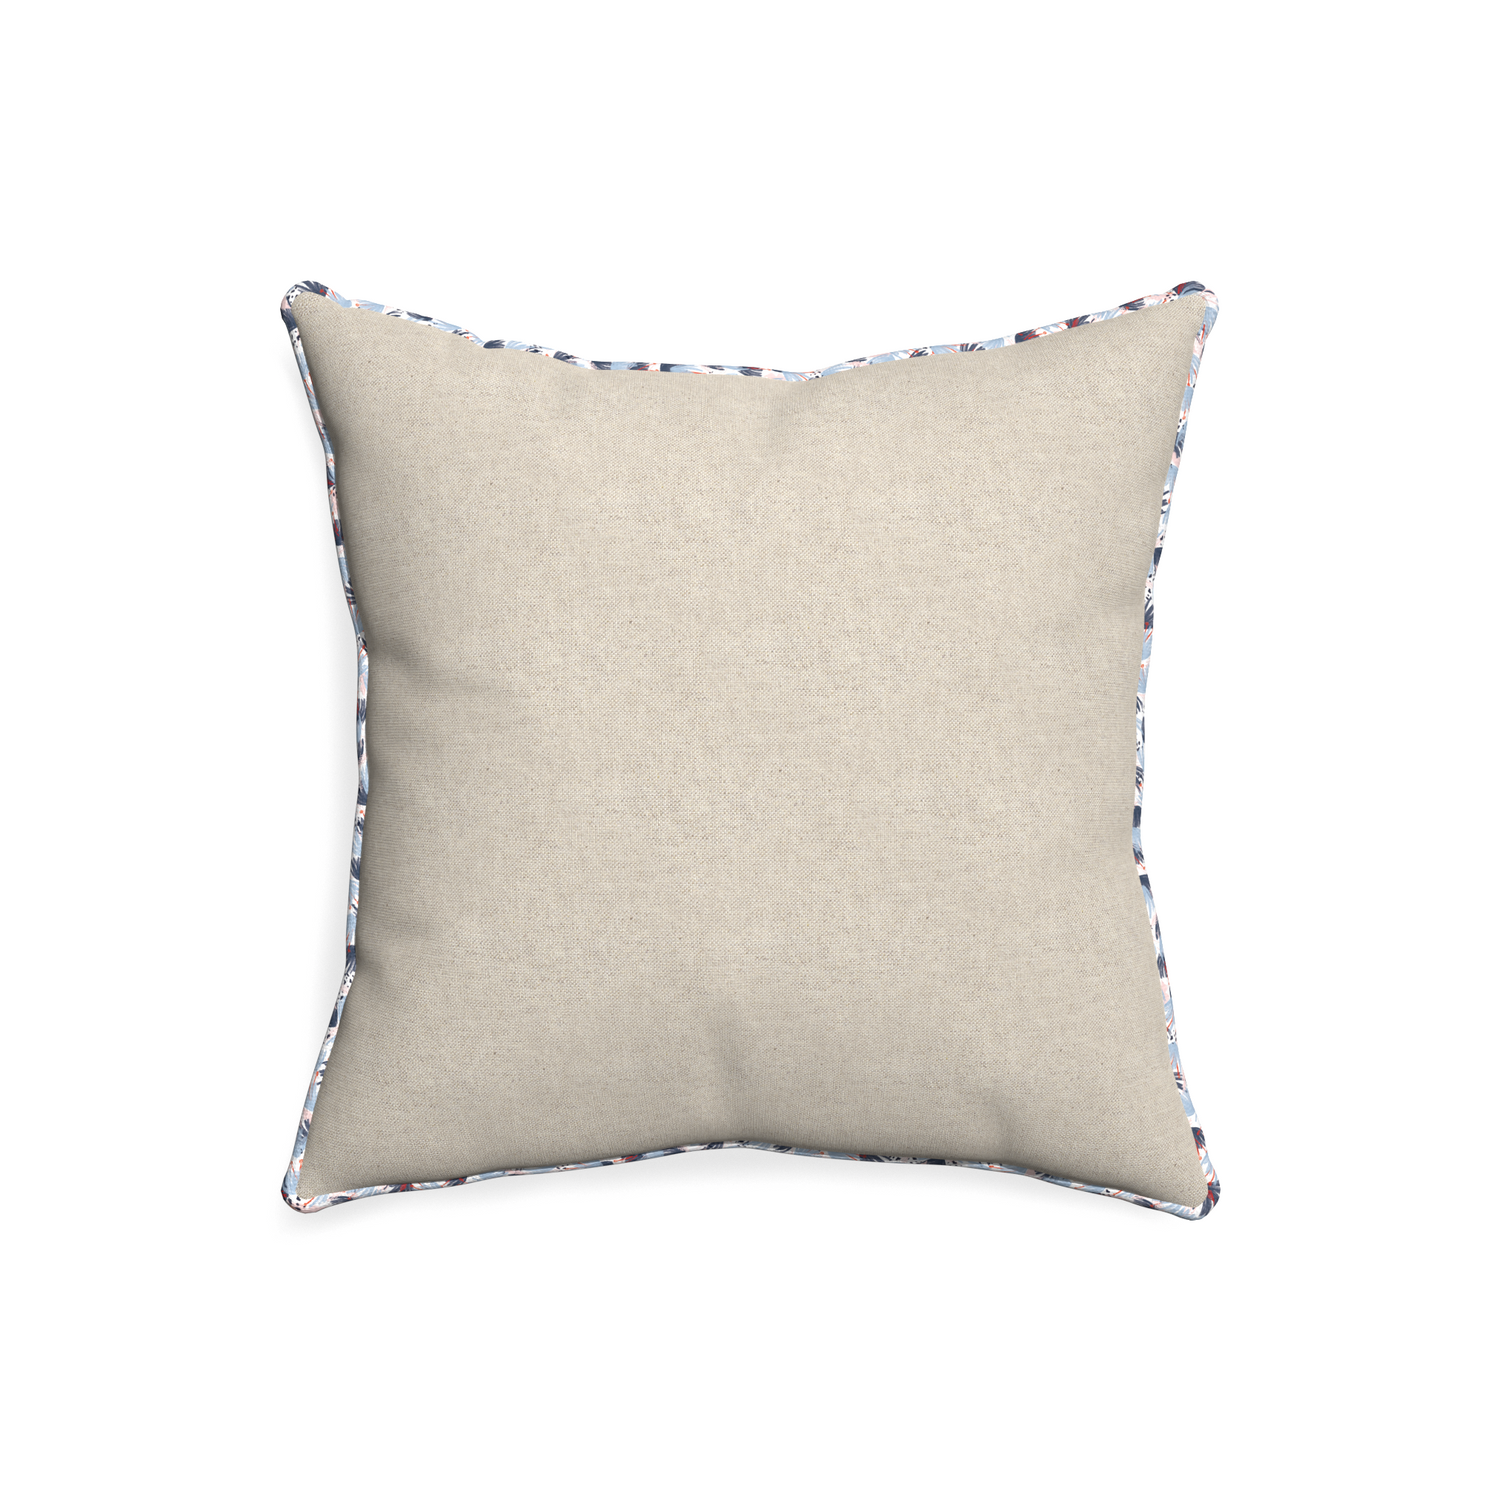 20-square oat custom pillow with e piping on white background